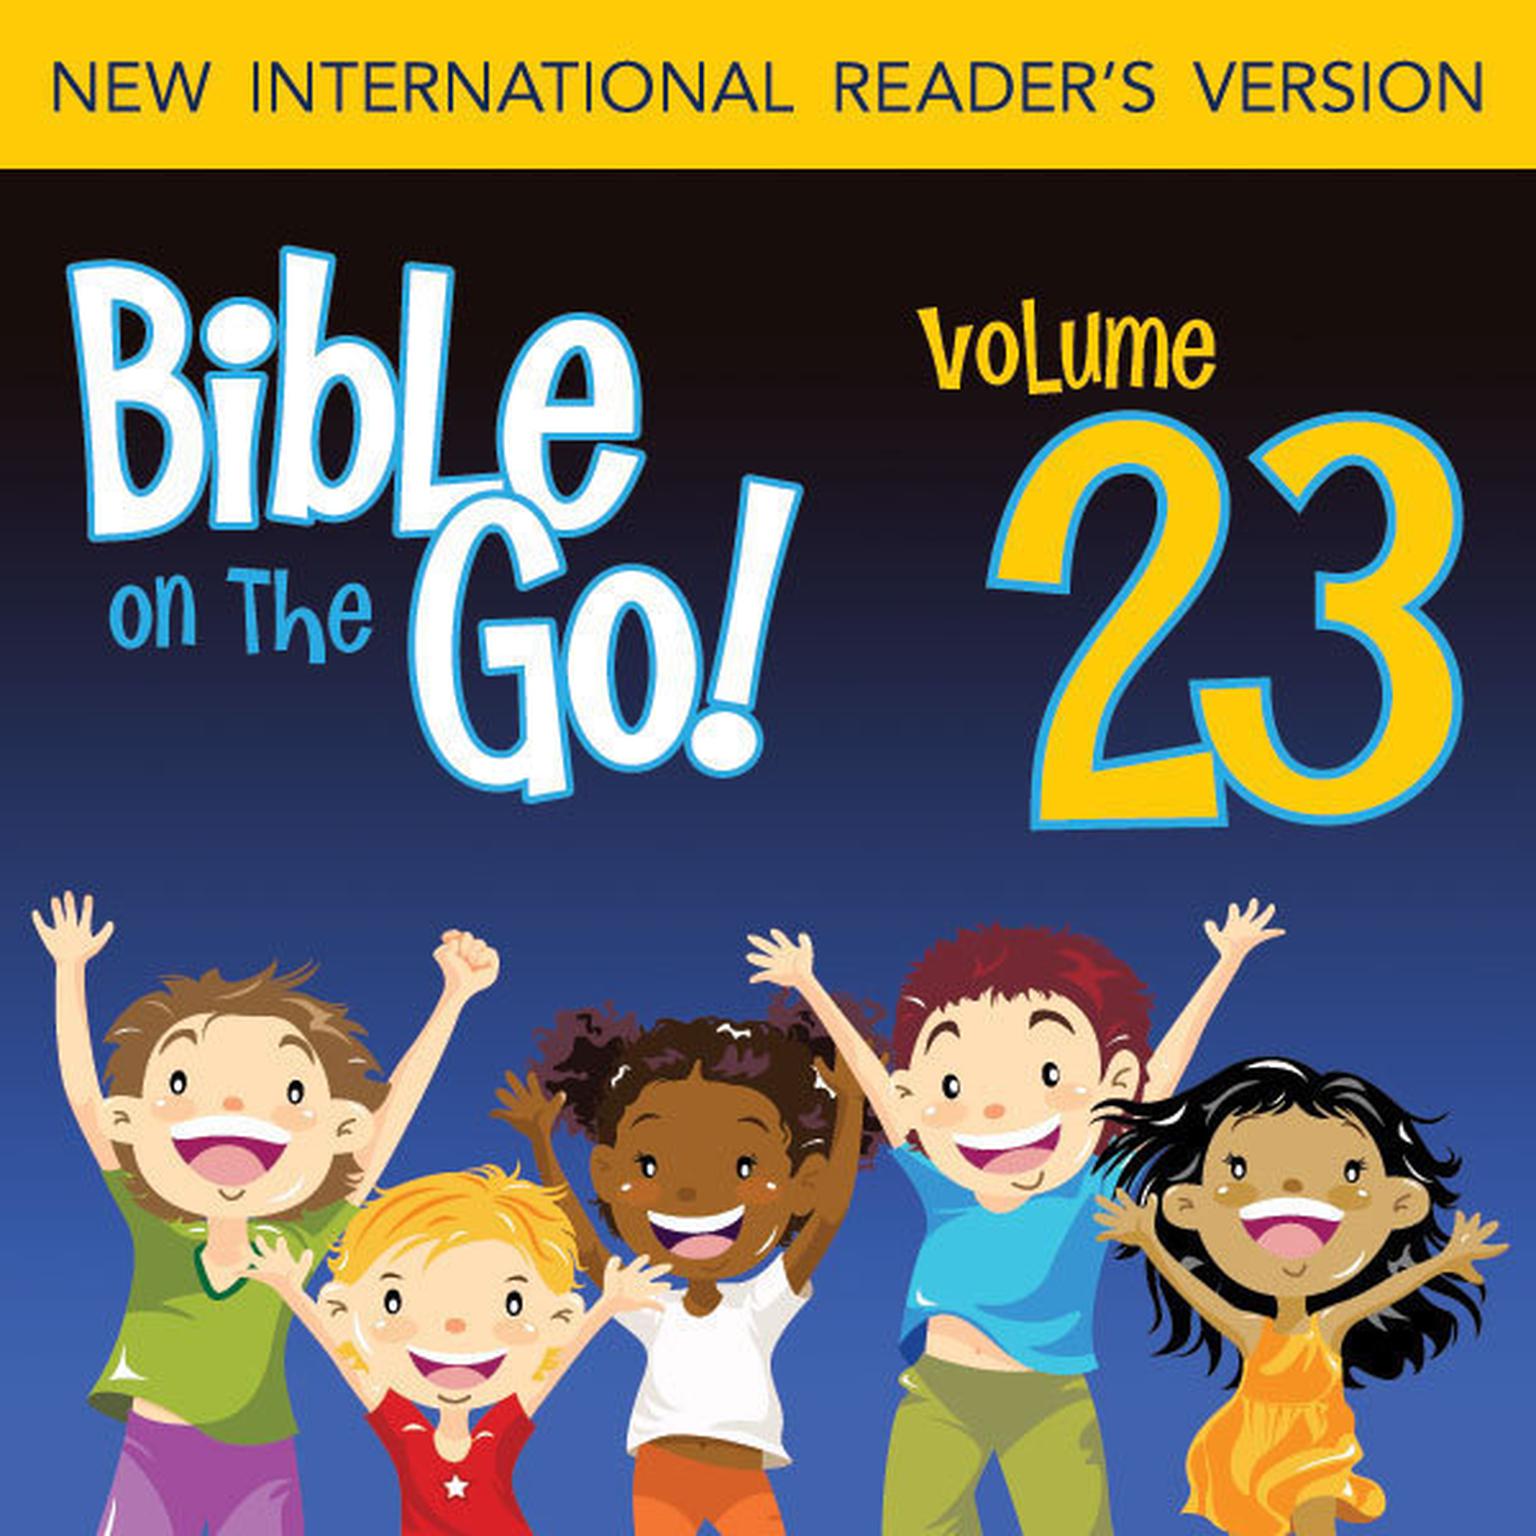 Bible on the Go Audio Bible - New International Readers Version, NIrV: Vol. 23 The Story of Nehemiah; Ezra Reads the Law (Nehemiah 1-2, 6-10) Audiobook, by Zondervan